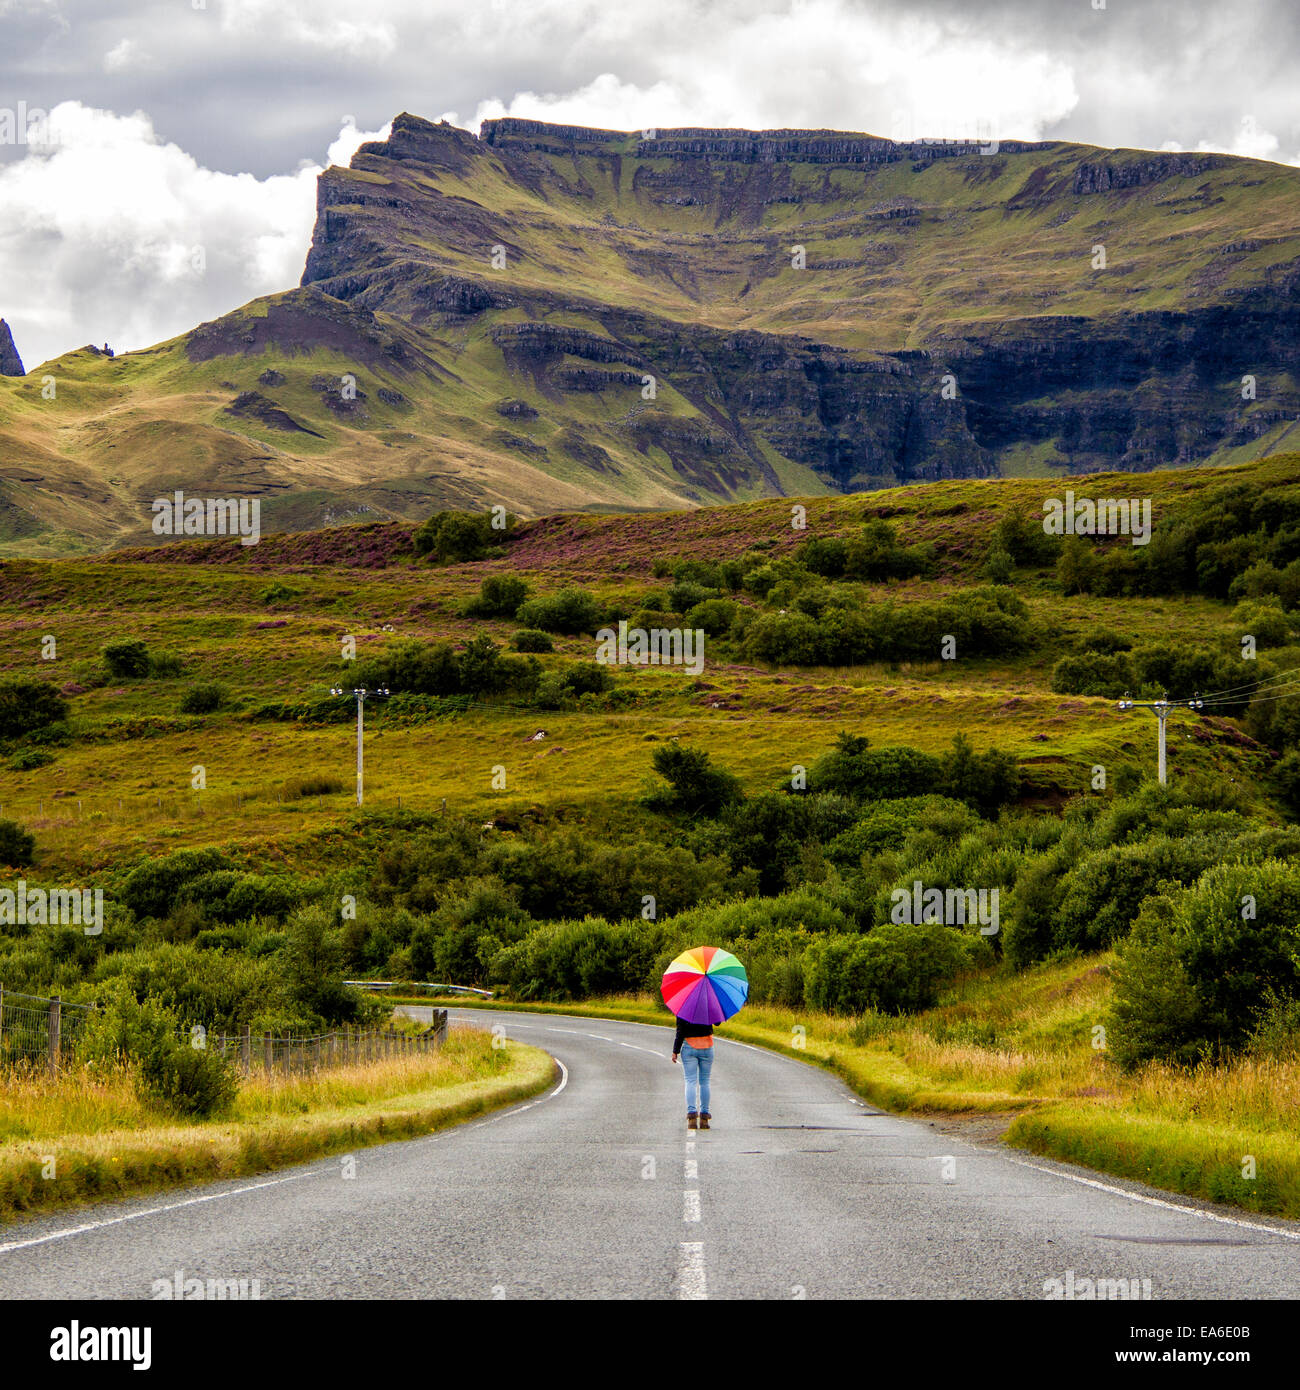 UK, Scotland, Woman with umbrella on country road Stock Photo